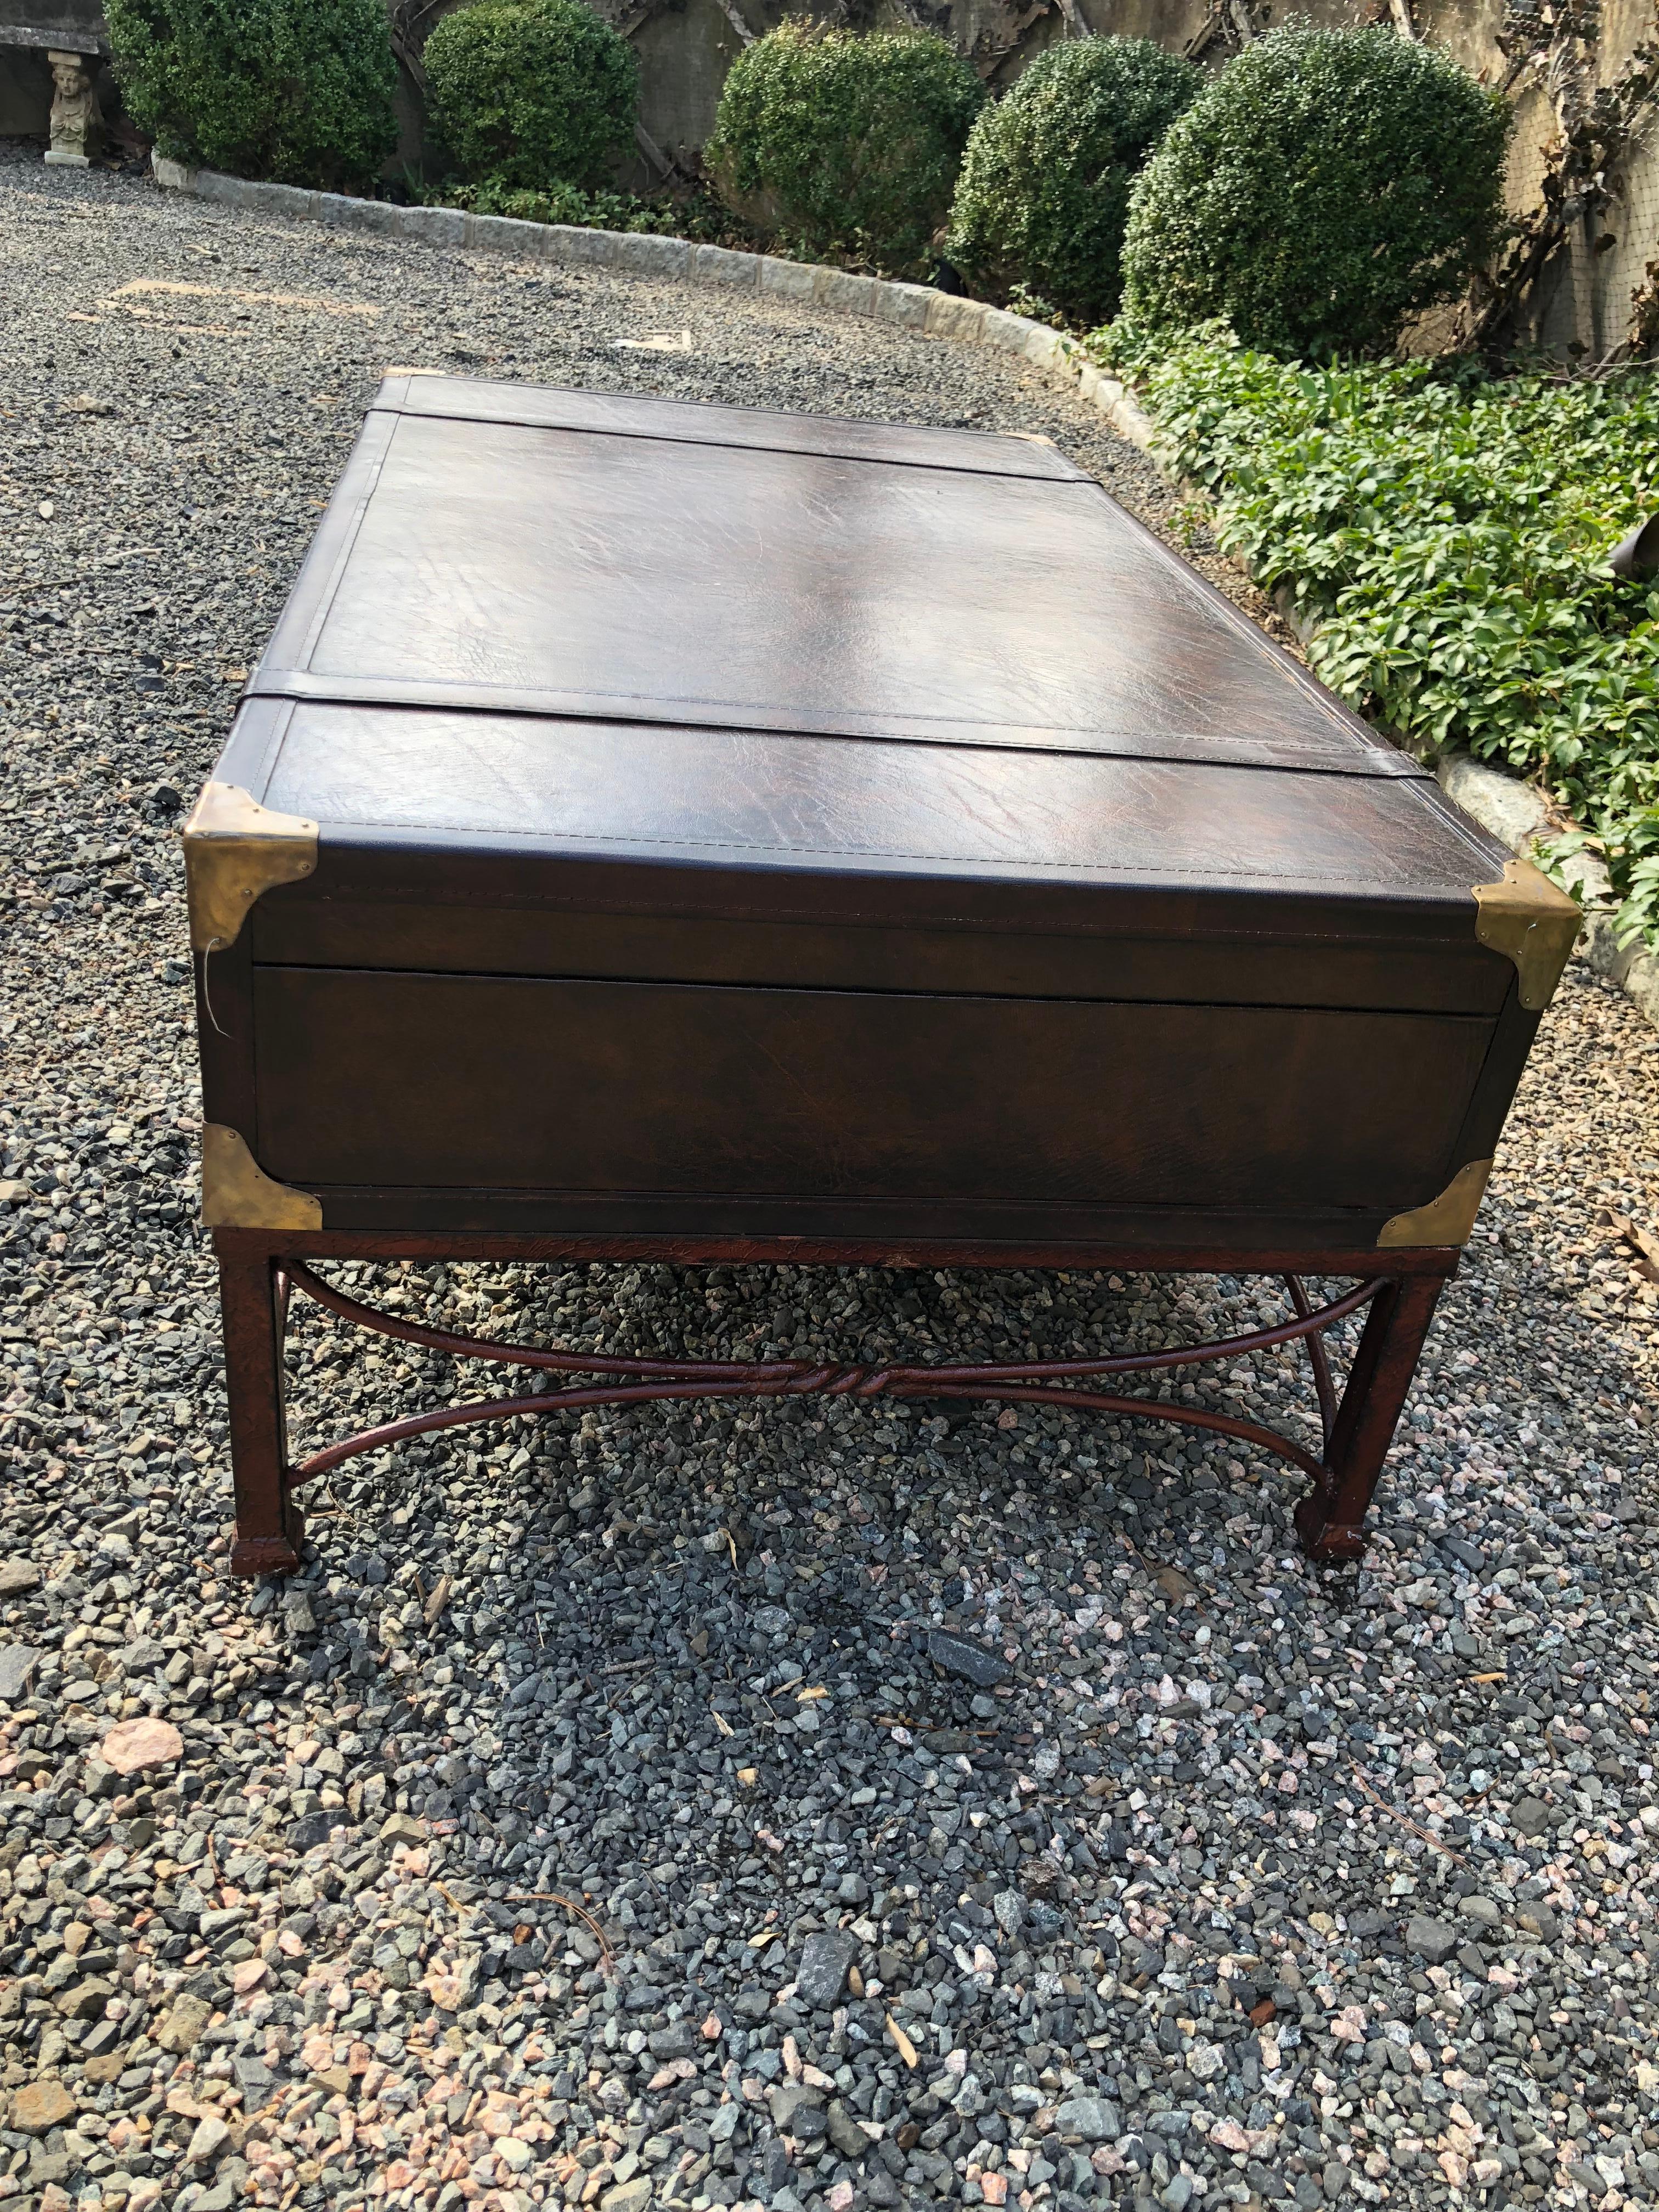 Ralph Lauren style coffee table in the form of a dark brown leather suitcase or trunk. Mounted on a painted iron base, the table is designed with luggage straps, buckles and brass corners. Suitcase does not open. An extremely handsome table for the